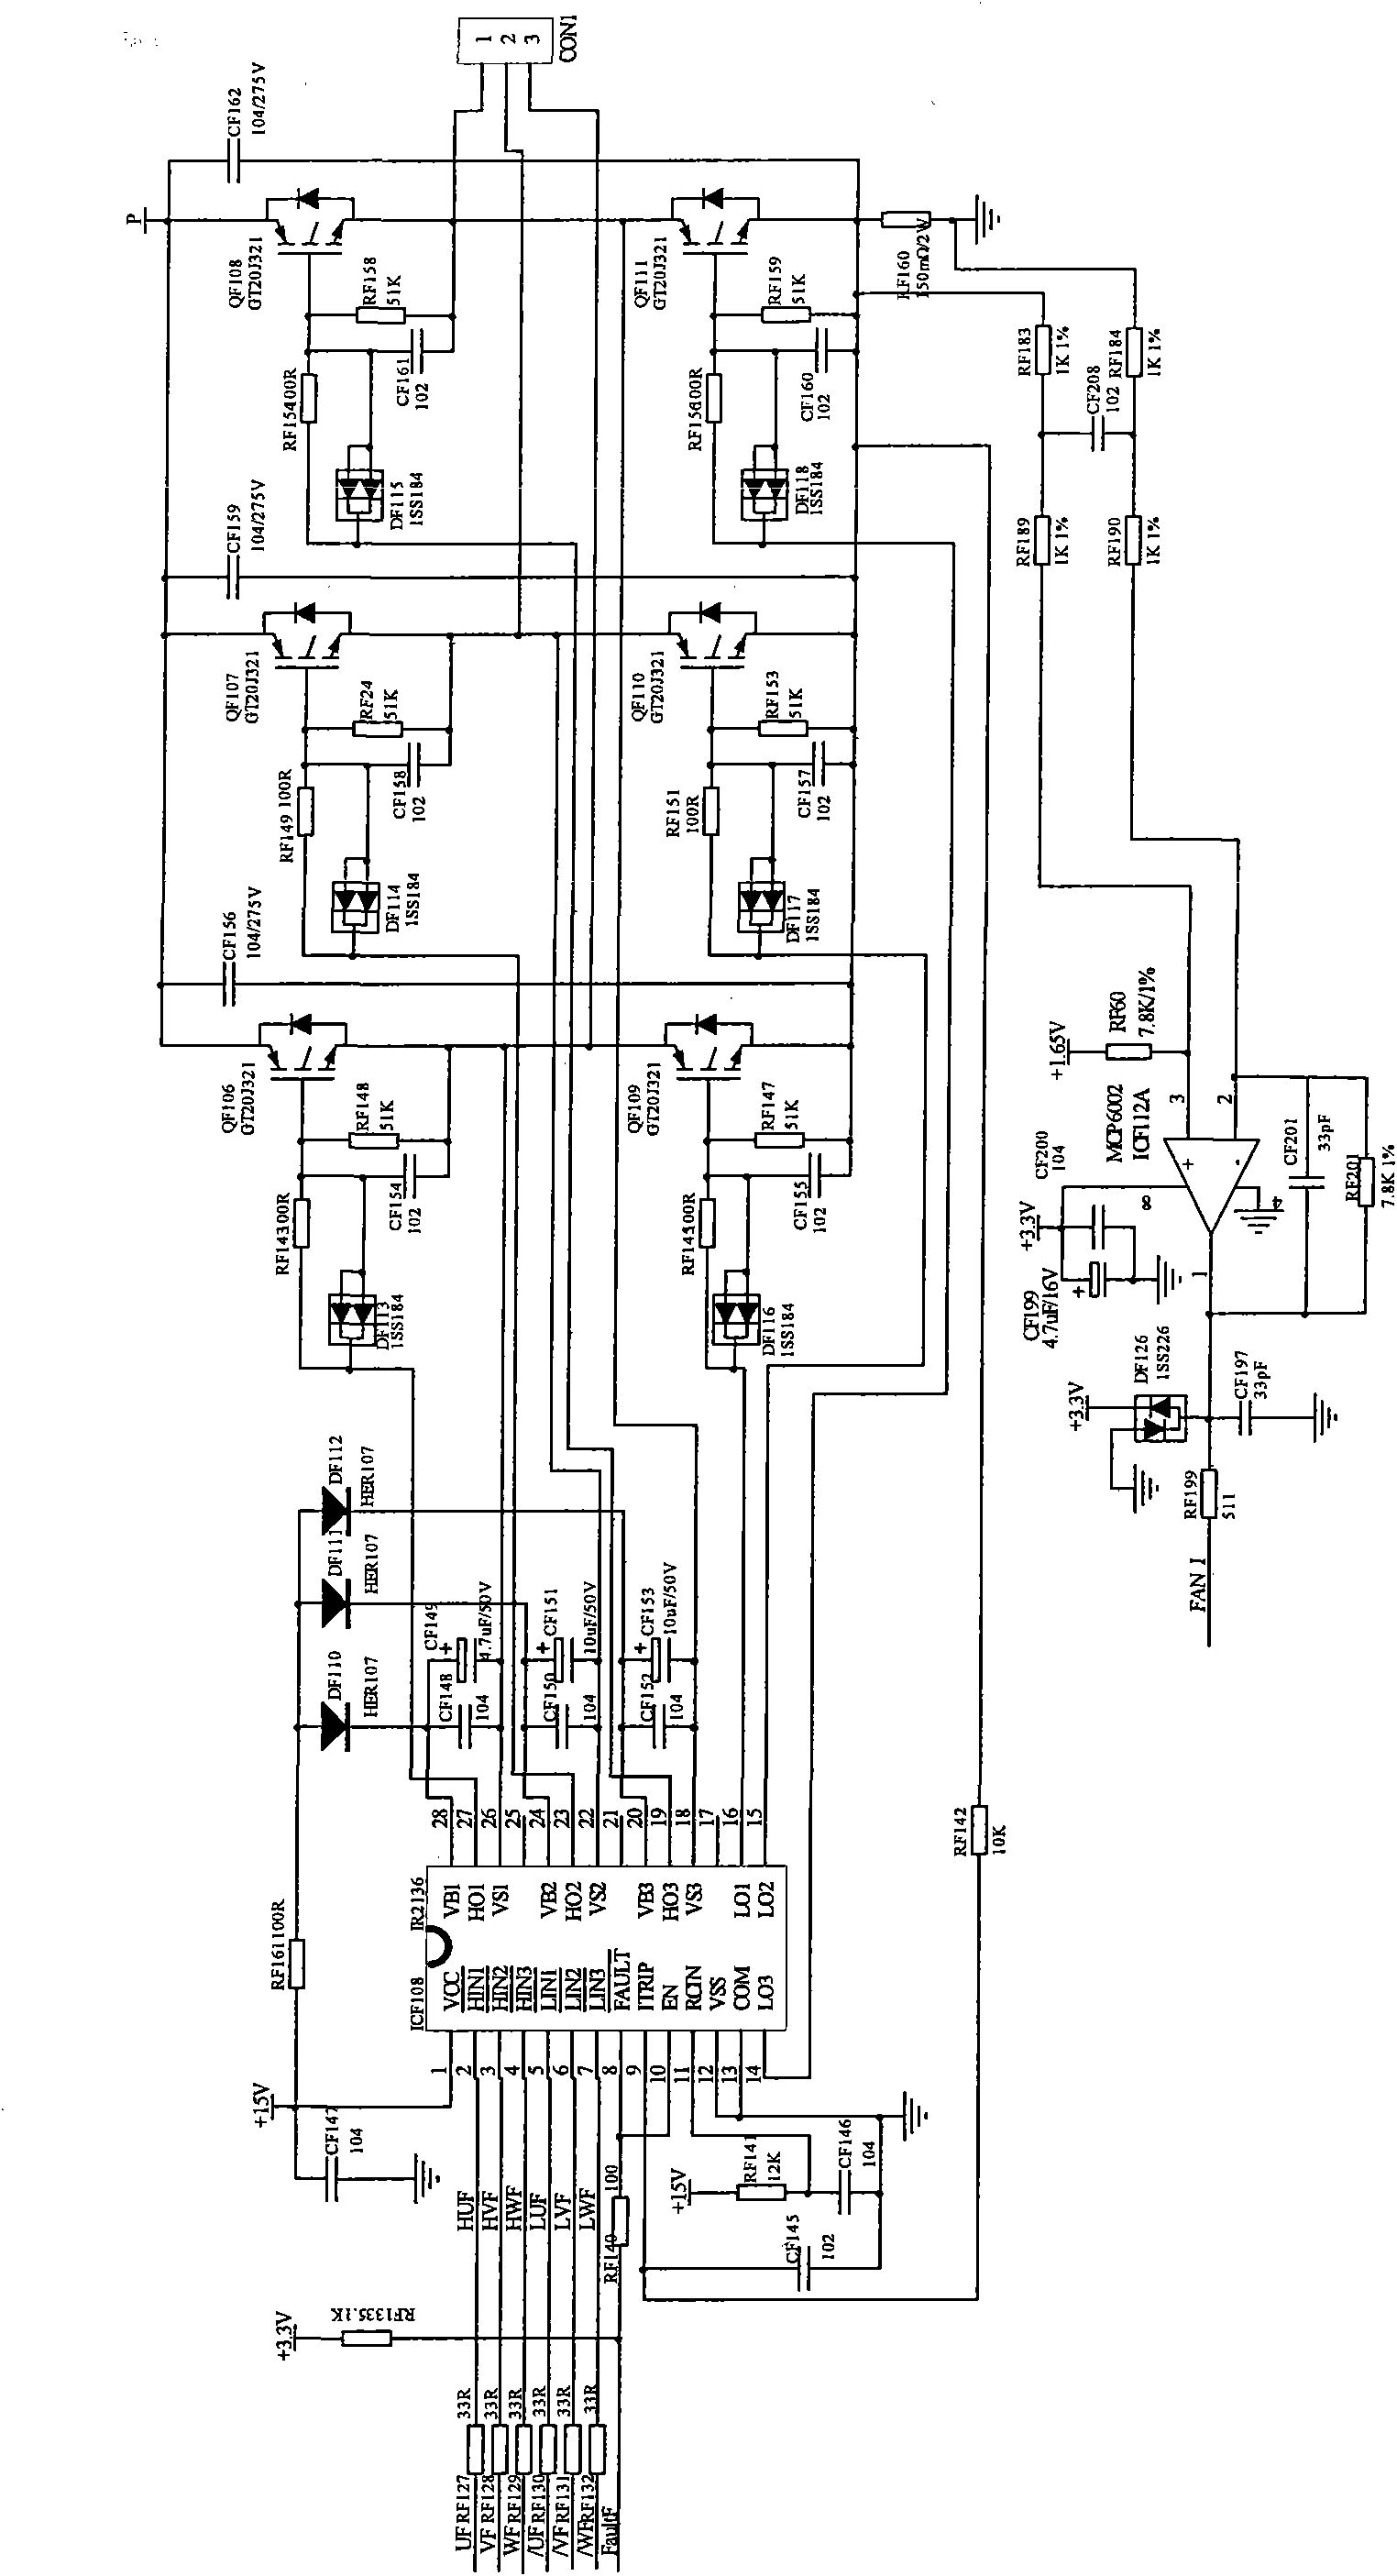 Dual frequency conversion control system